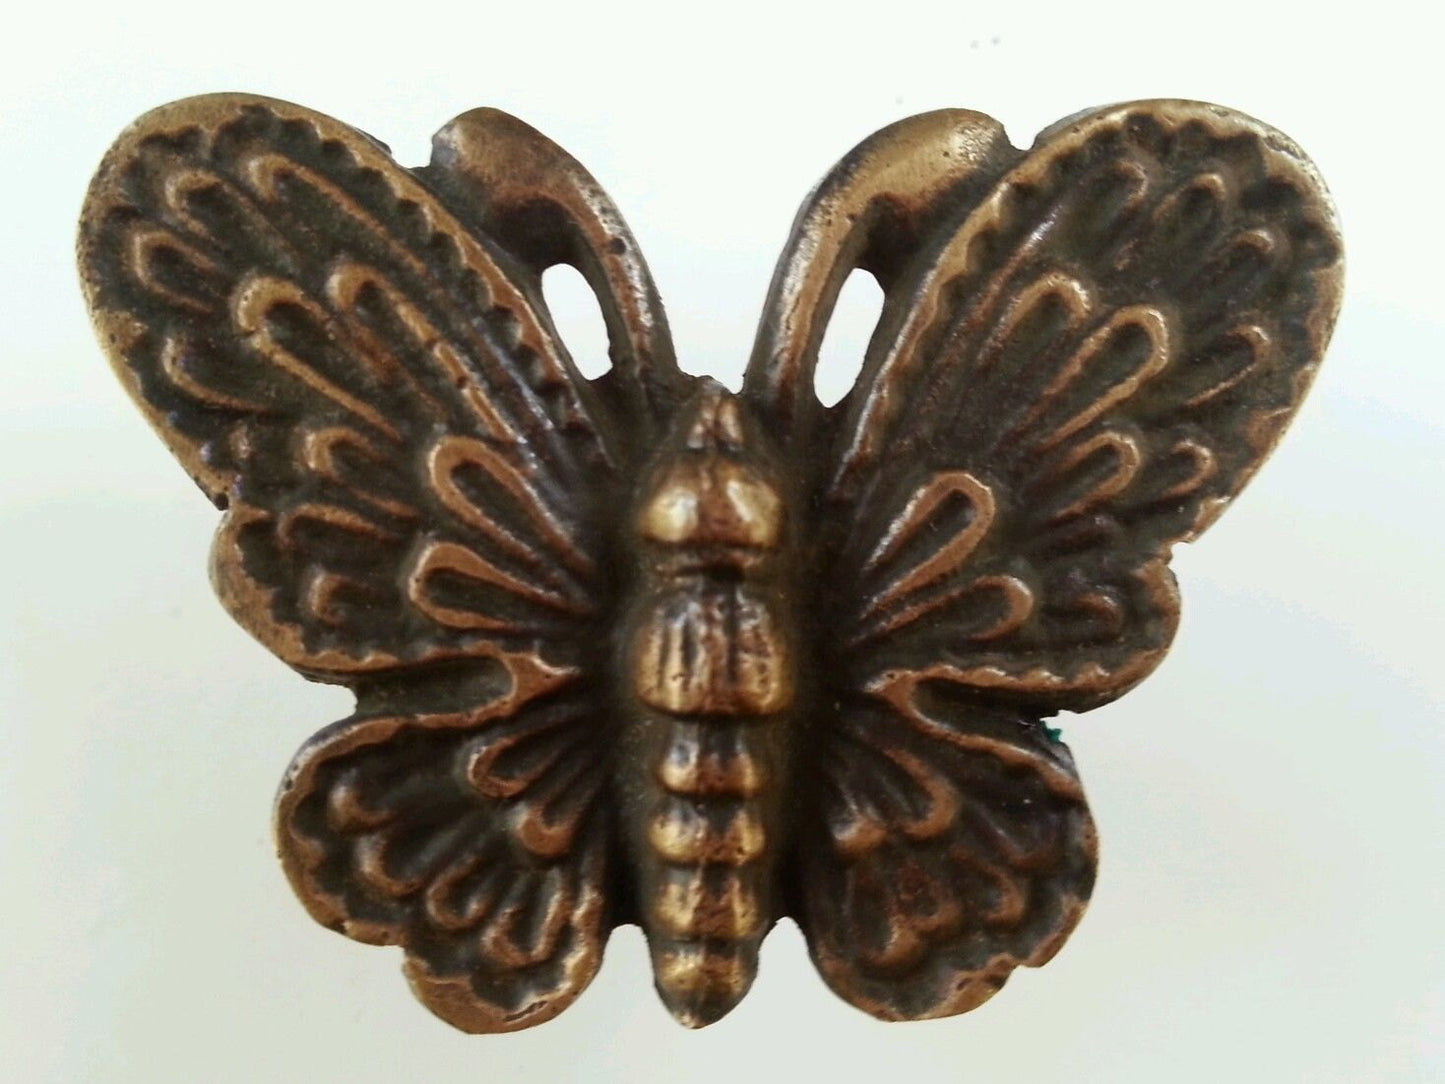 5 Butterfly Cabinet Drawer Door Knoby, Pulls, Handles, Solid Brass 1 7/8"w #Z13